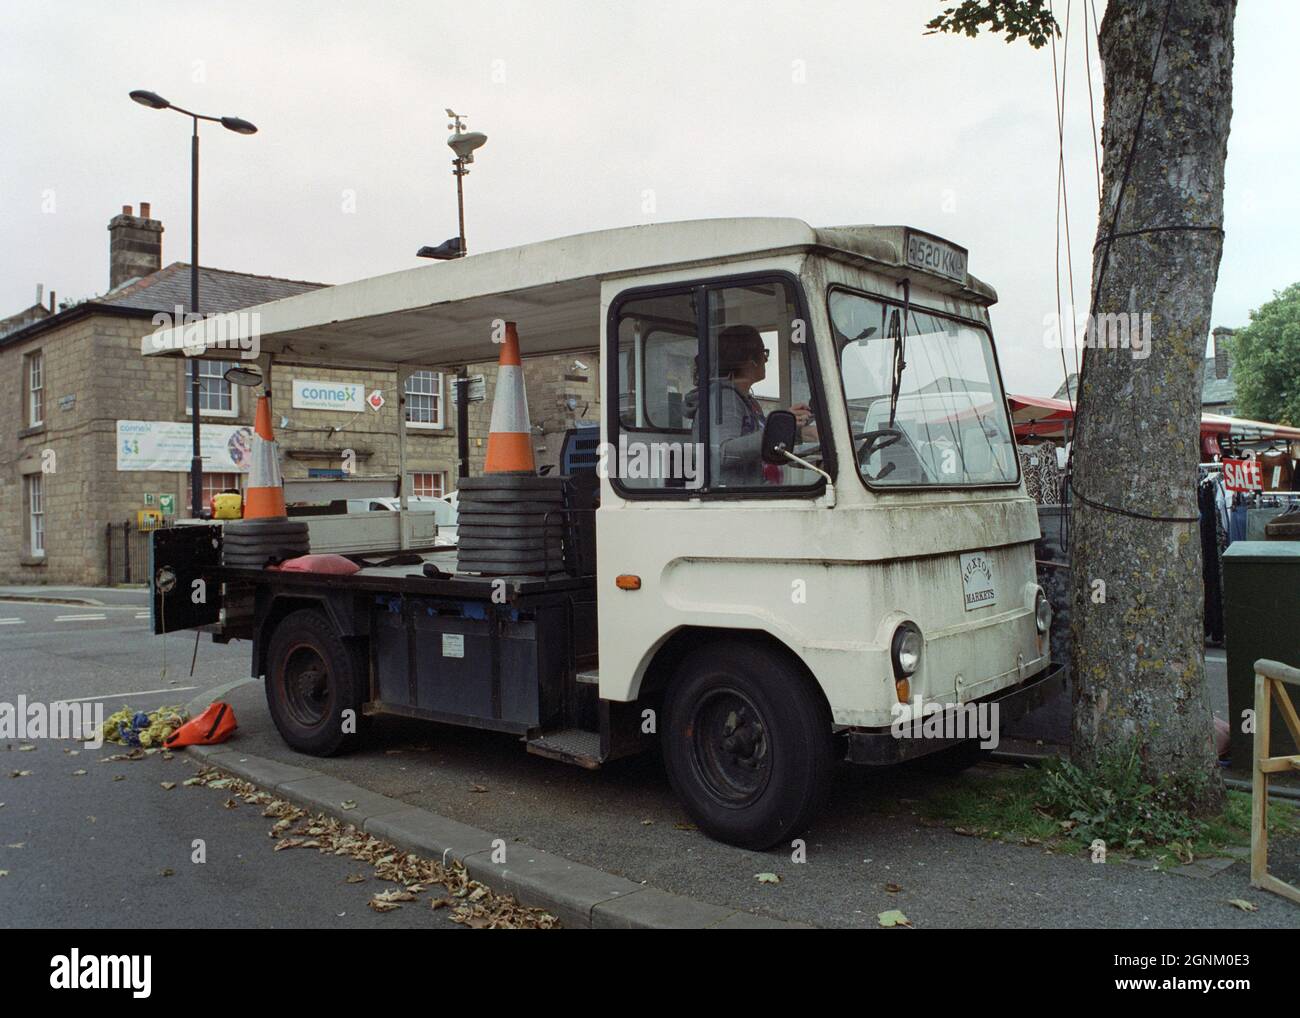 Buxton, UK - 4 September 2021: An old milk float at a market in Buxton. Stock Photo